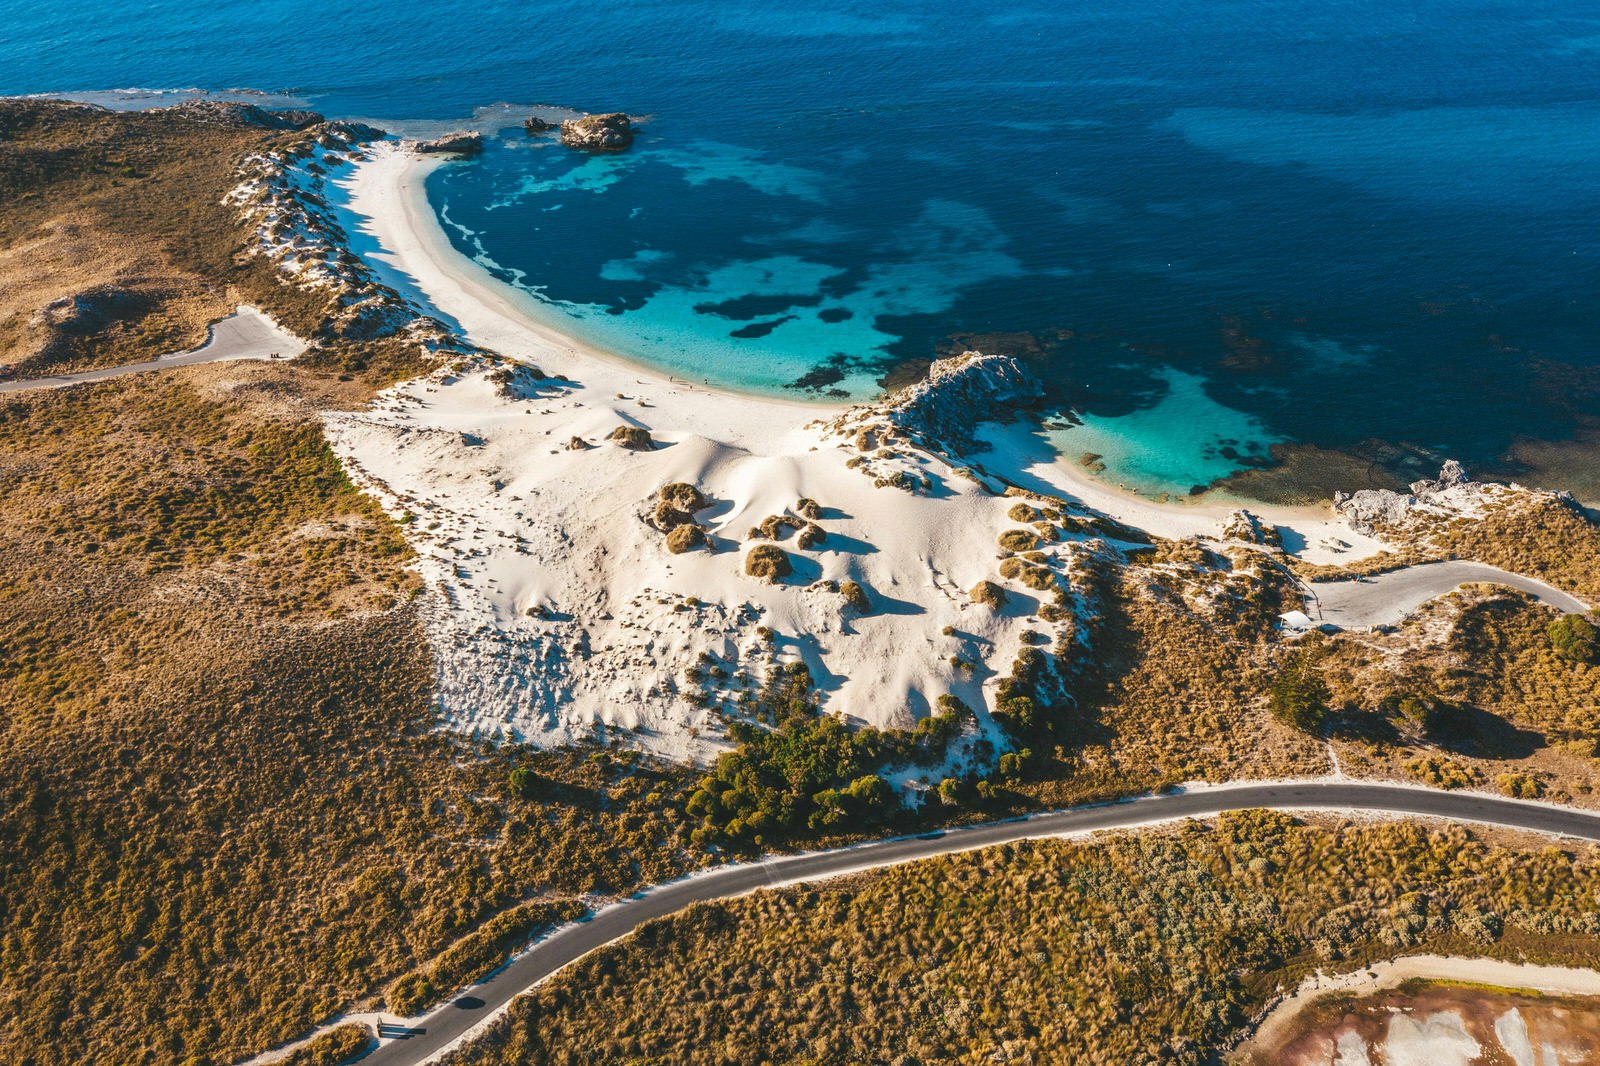 An aerial shot of Rottnest Island's coastline. Clear blue waters gently lap a white sandy beach that gives way to dunes and dense shrubbery